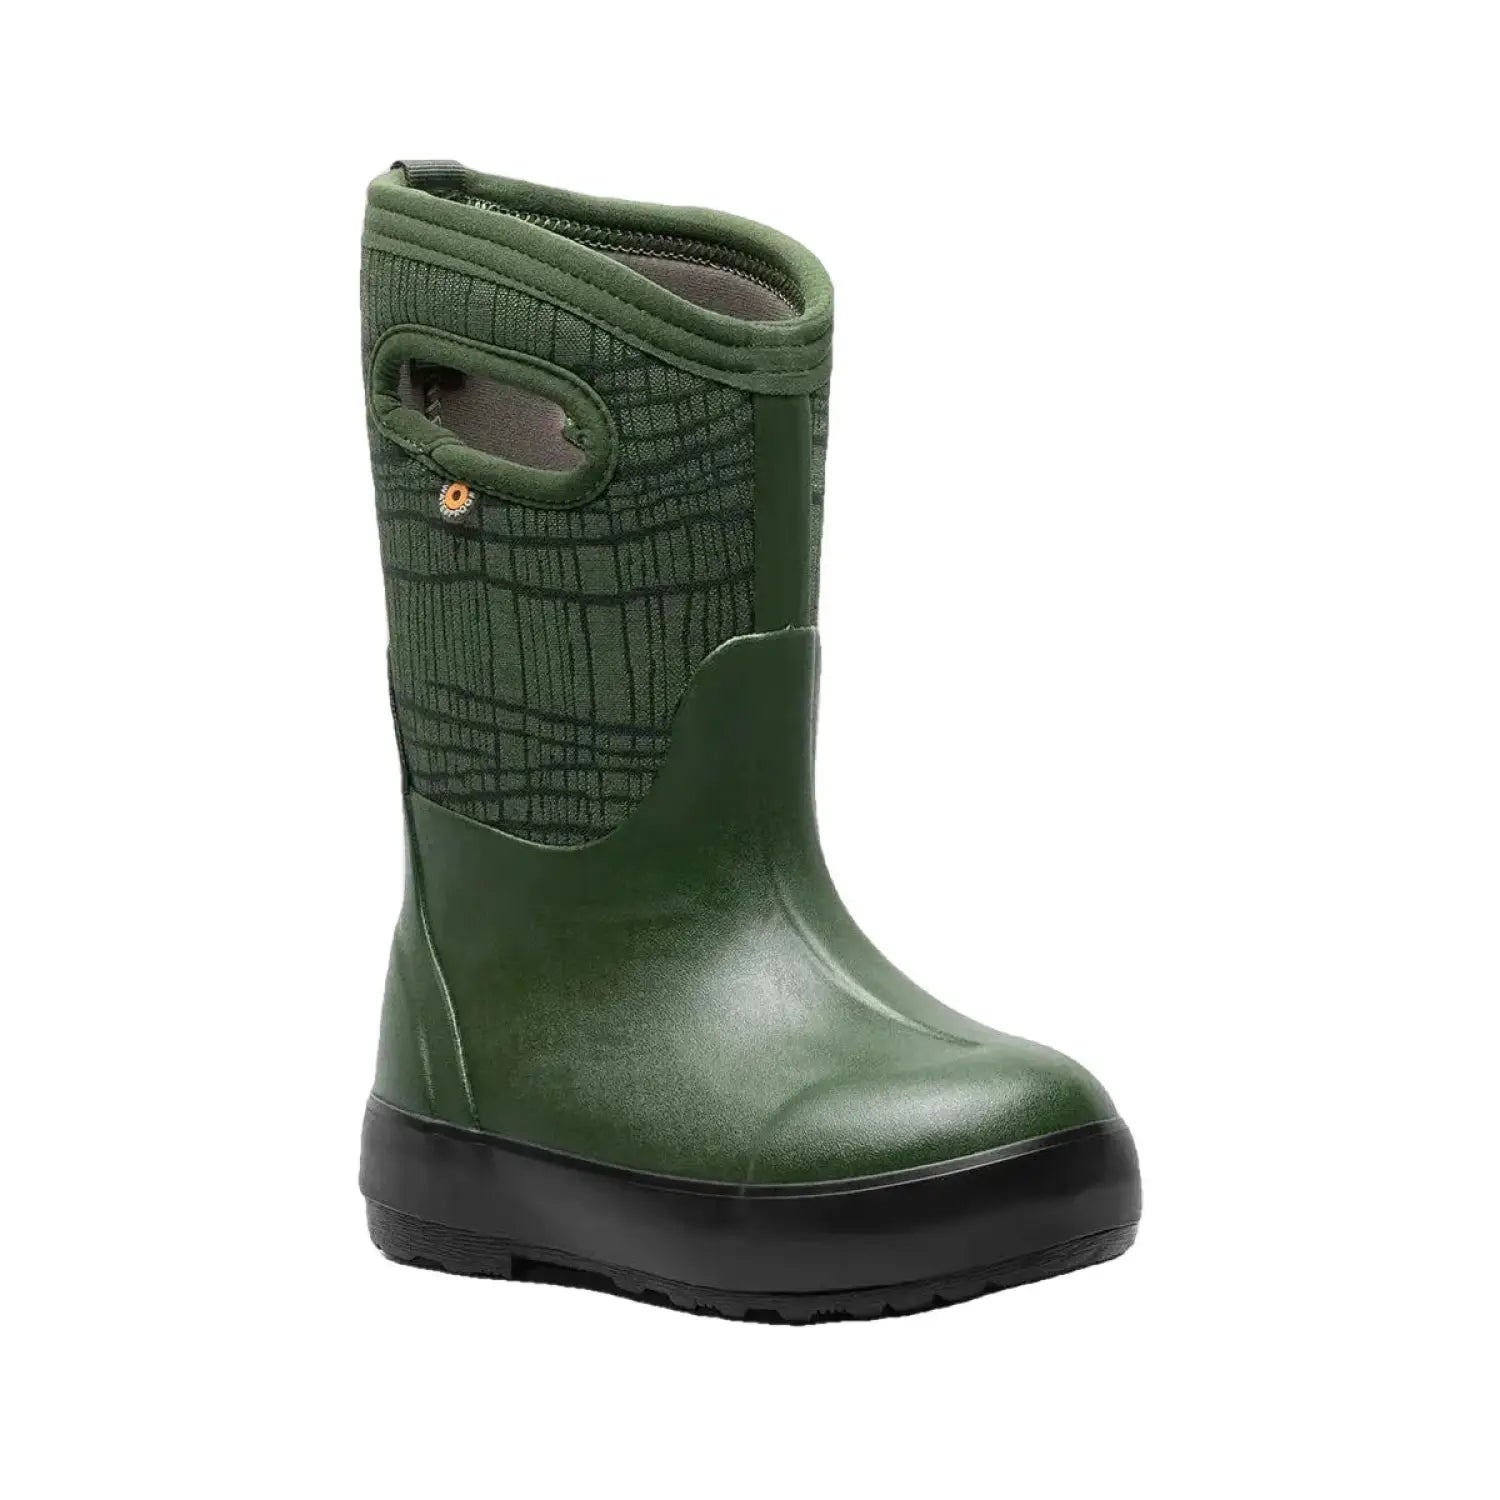 BOGS K's Classic II Cracks, Dark Green, front and side view 